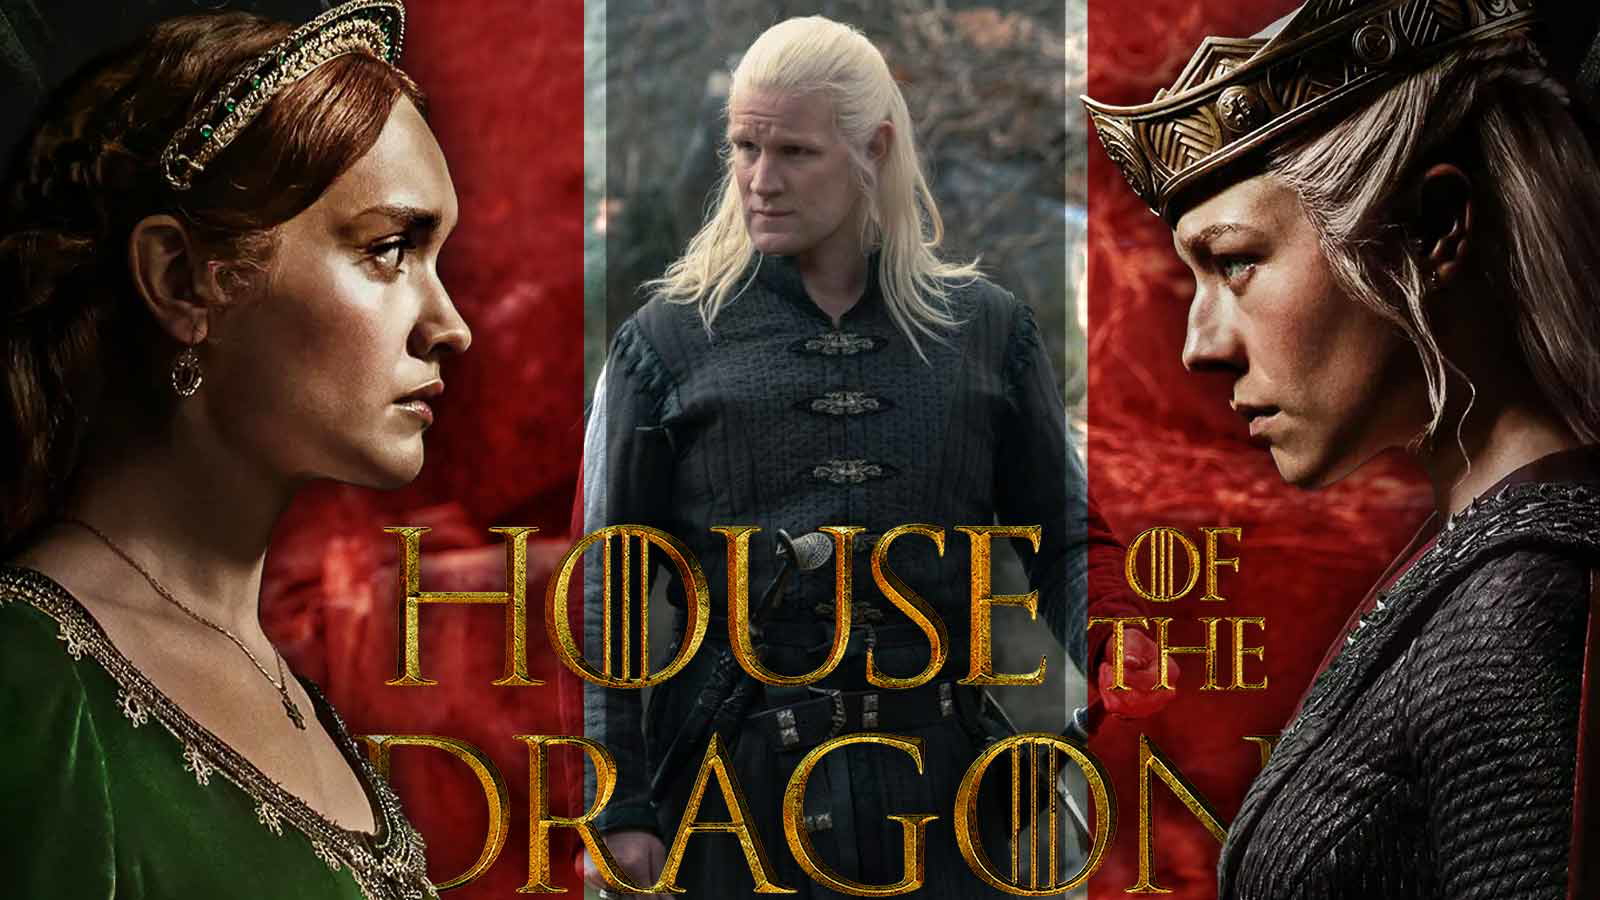 ‘House of the Dragon’ Season 2 May Be Erasing a Crucial Character from Original Lore as Episode 6 Teases a Major Plot Twist in the Future